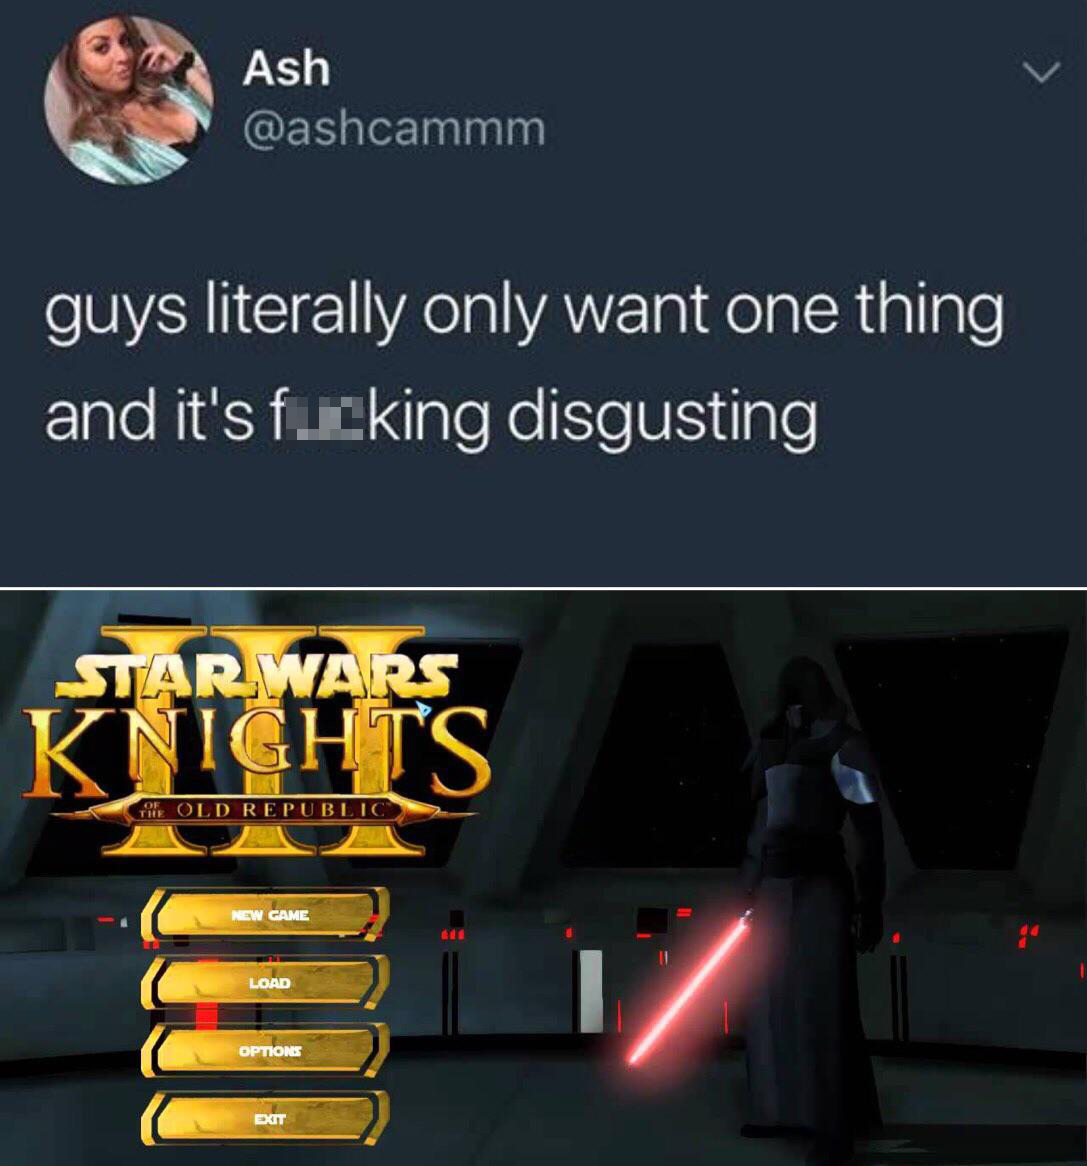 funny tweets  - knights of the old republic - Ash guys literally only want one thing and it's fucking disgusting Star Wars Knights The Old Republic New Game Load Iiii Options Exit